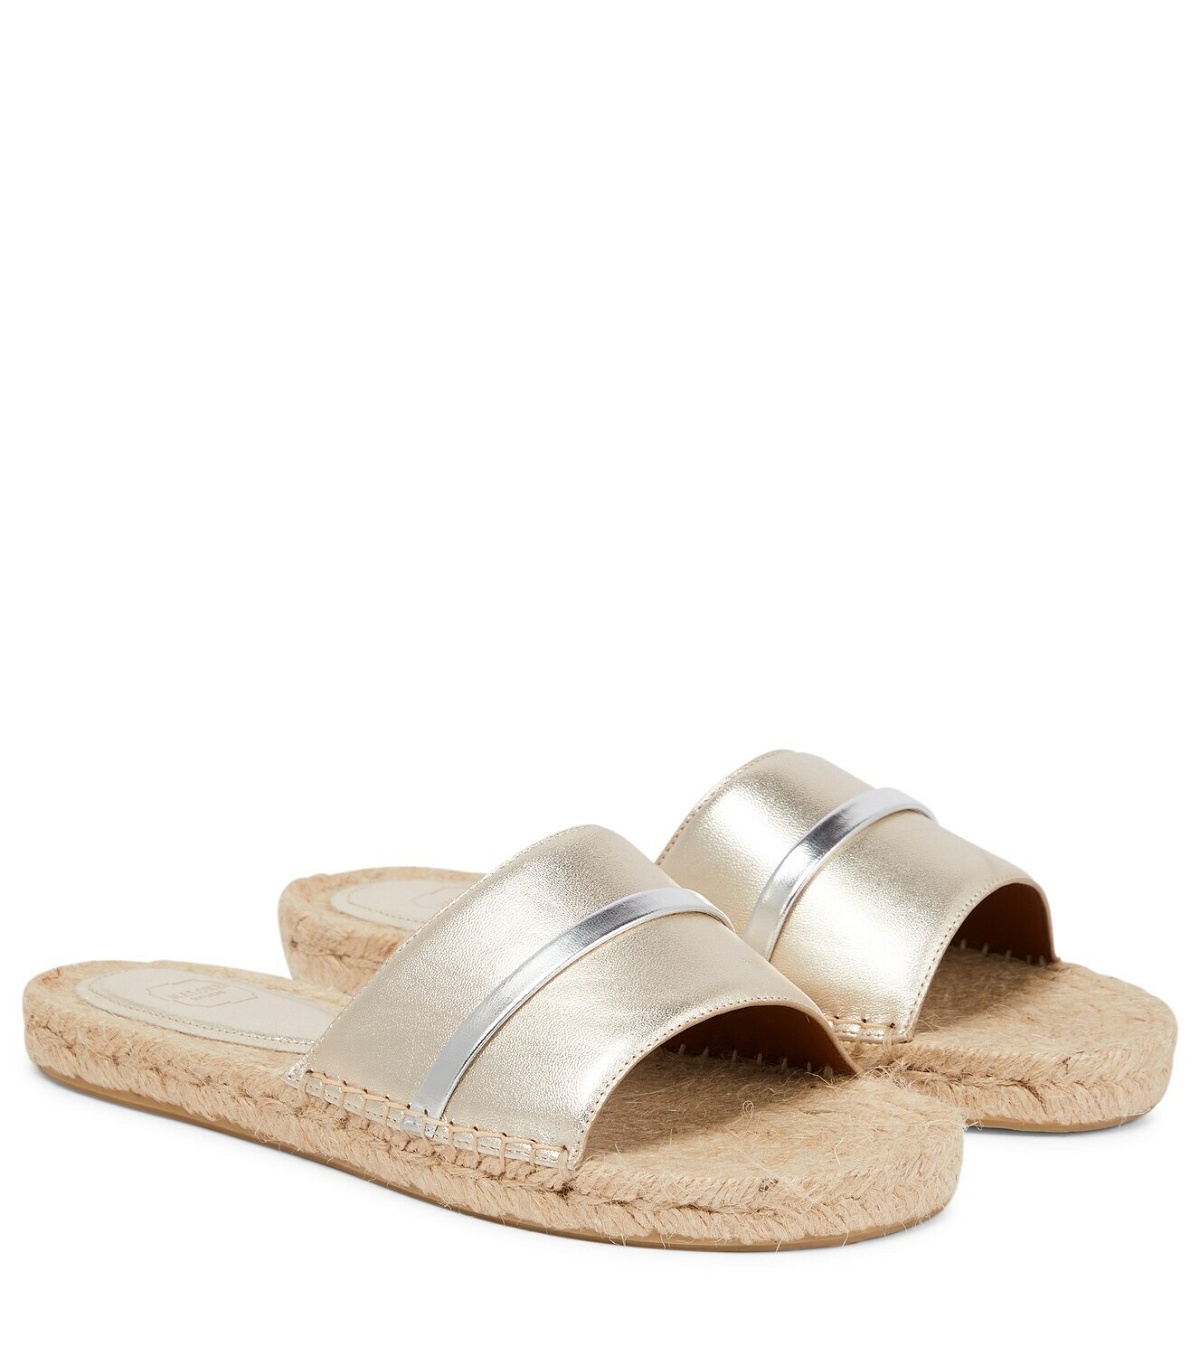 Malone Souliers Sol metallic espadrille sandals Malone Souliers